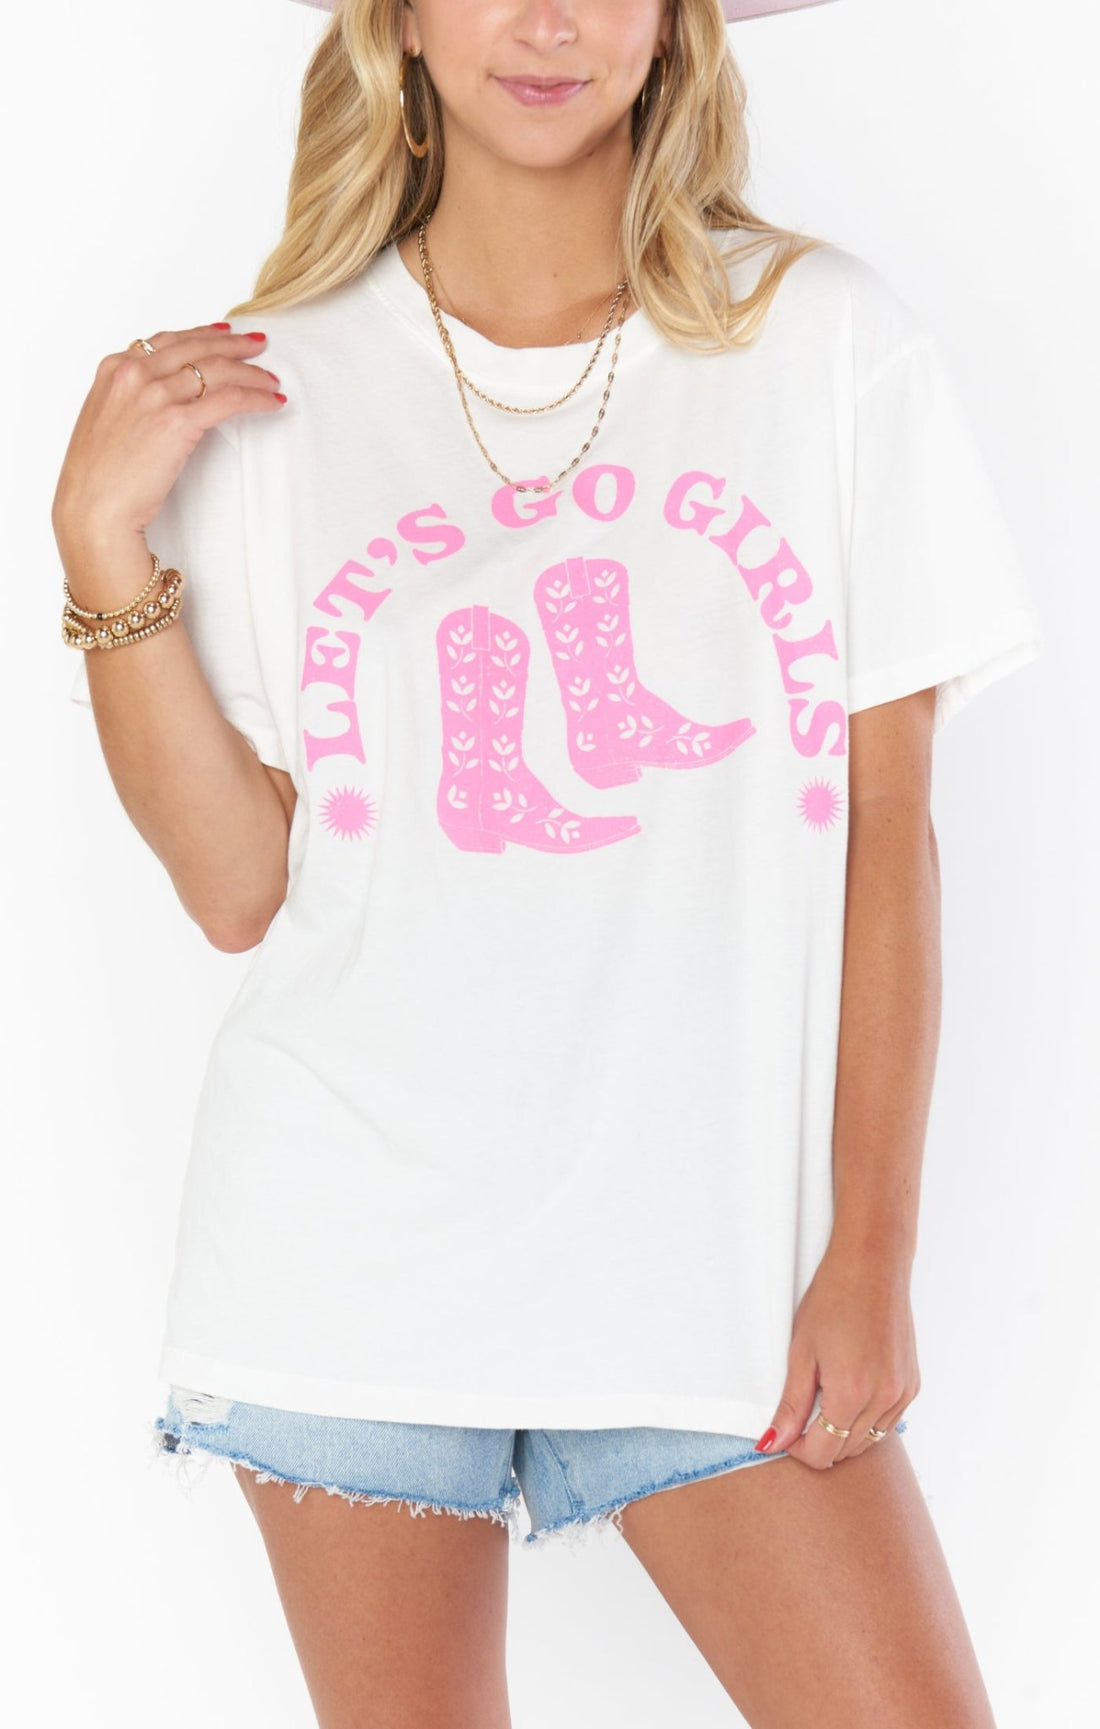 Shop Show Me Your Mumu Travis Tee Lets Go Girls Graphic - Premium T-Shirt from Show Me Your Mumu Online now at Spoiled Brat 